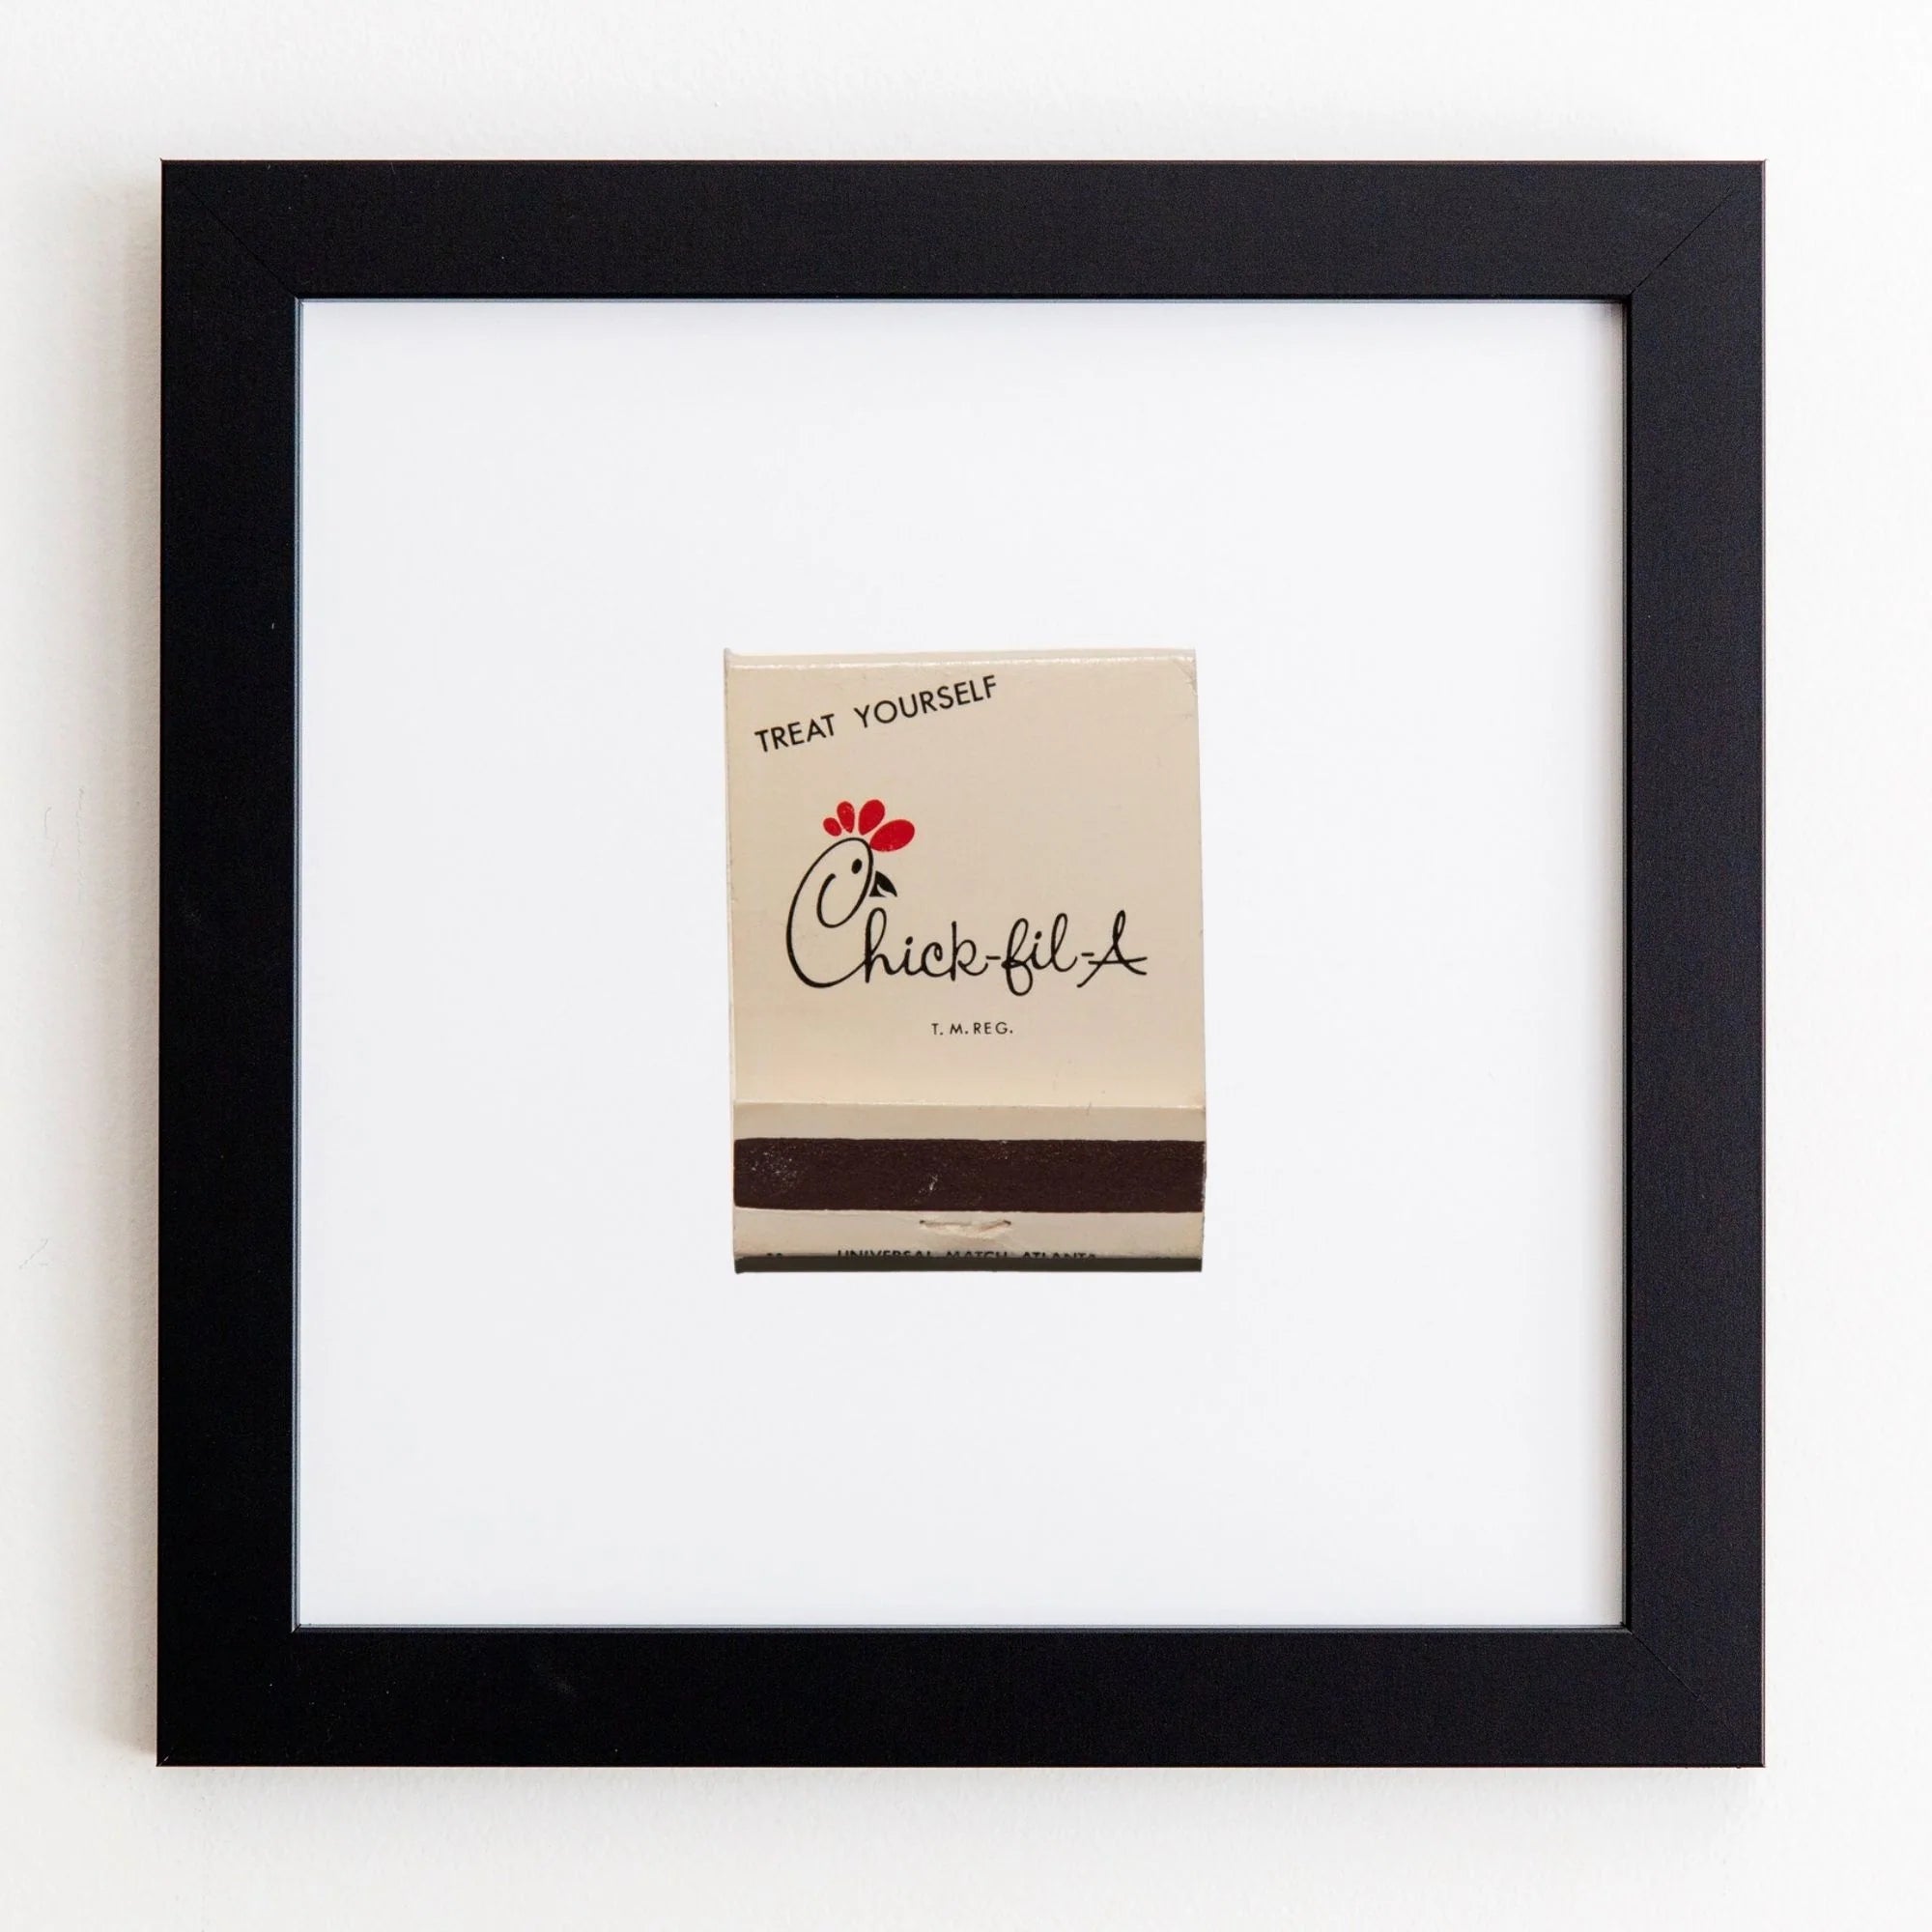 A framed Match South "Treat Yourself" gift card mounted on a white wall. The card features the Chick-fil-A logo and a small red heart above the acrylic text.